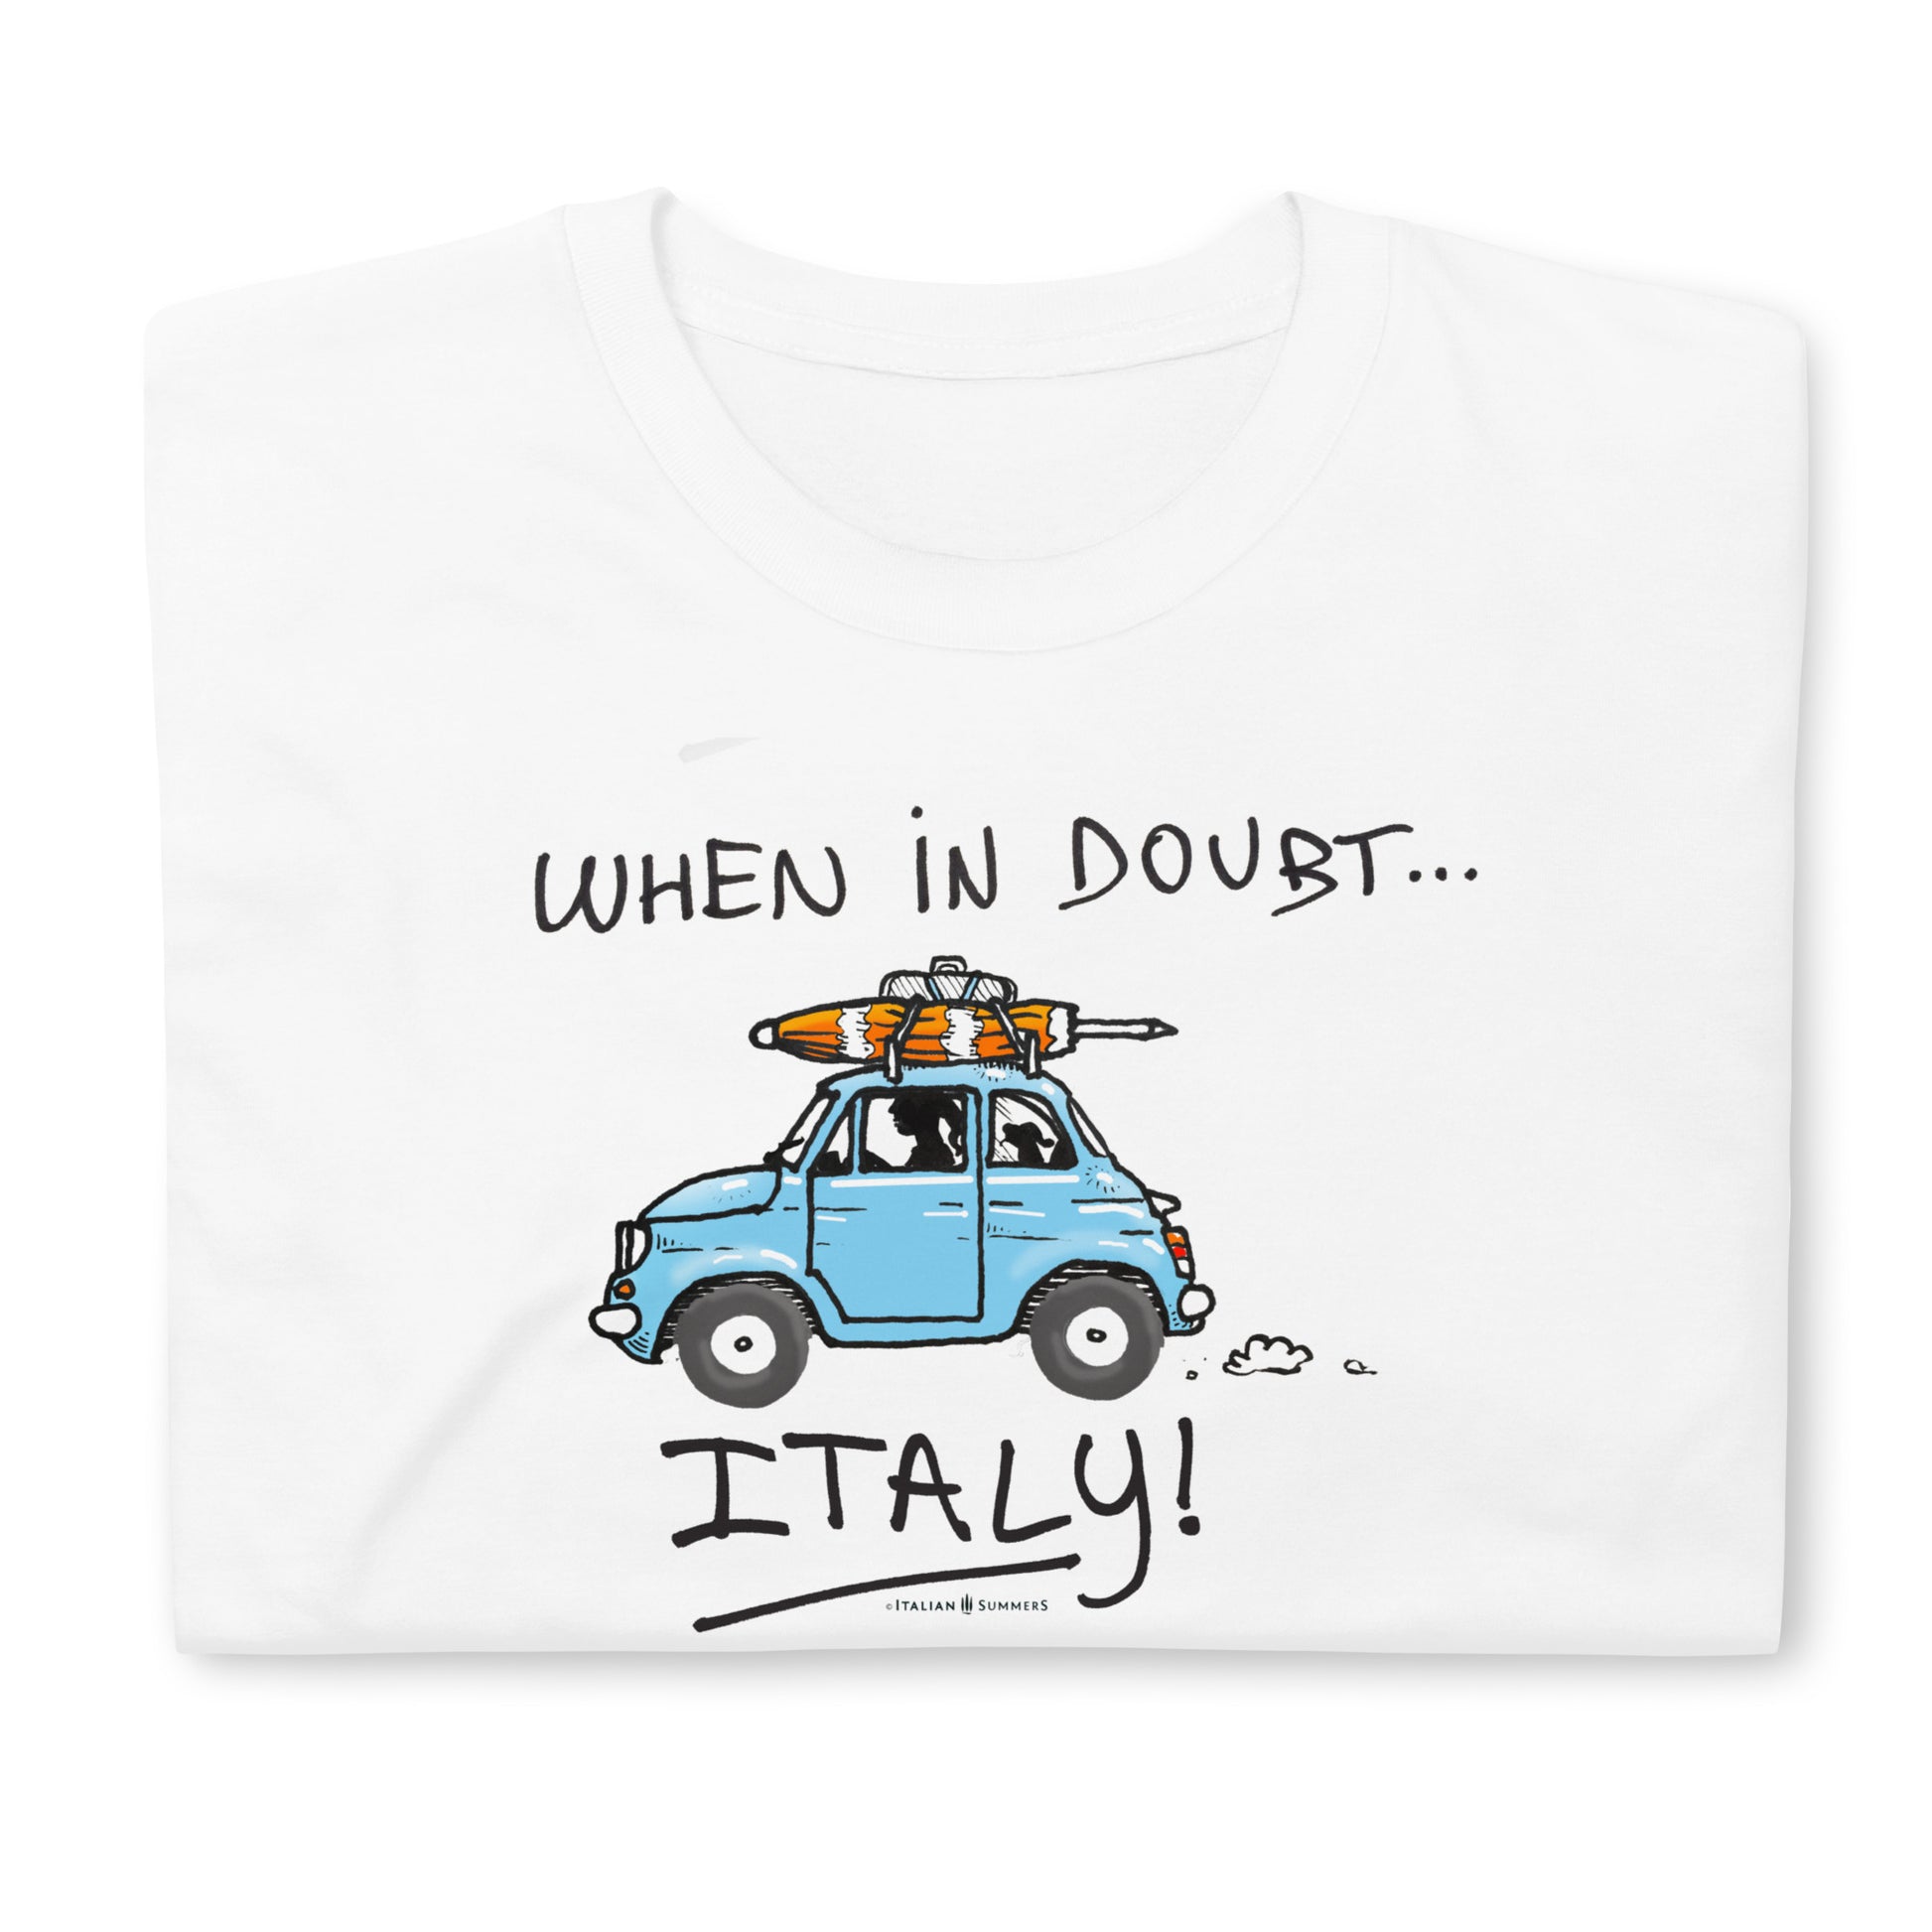 Italy Inspired white cotton T shirt "When in doubt... ITALY!" a tee with a cute blue vintage FIAT 500 rushing towards the sea with  a doggie in the back seat and a beach umbrella on the roof-rack.  Made by Italian Summers